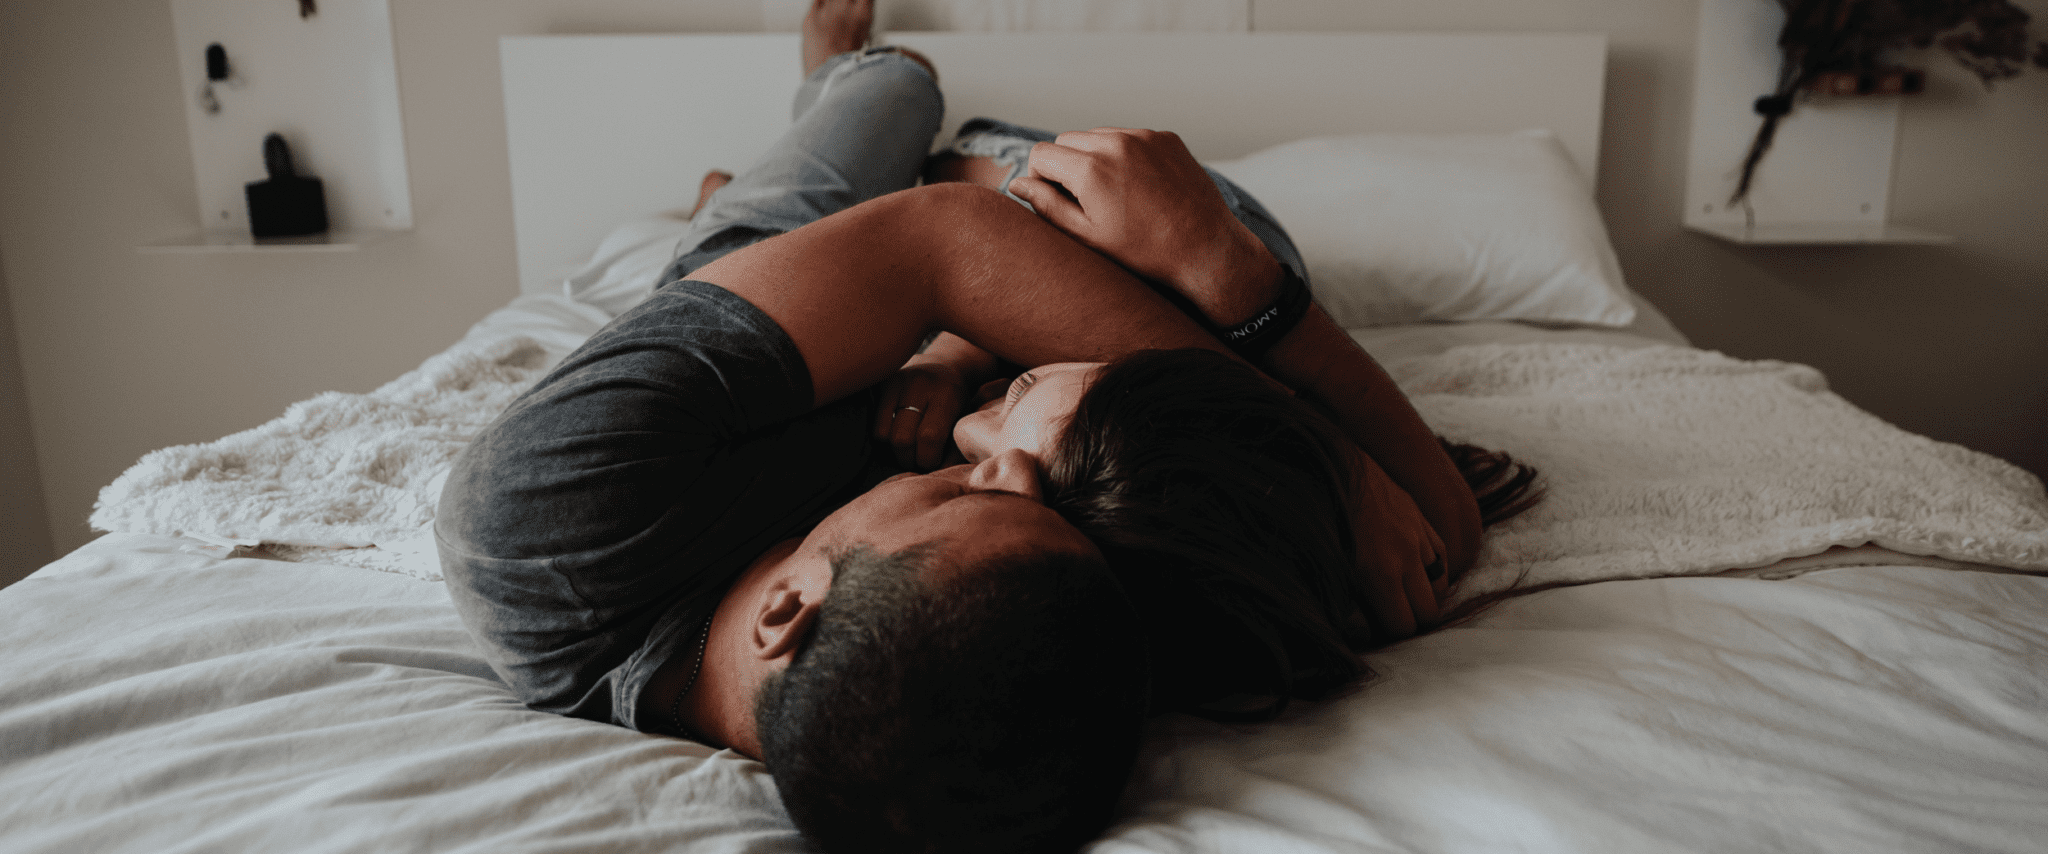 5 Tips To Keep Sex Healthy In Your Marriage